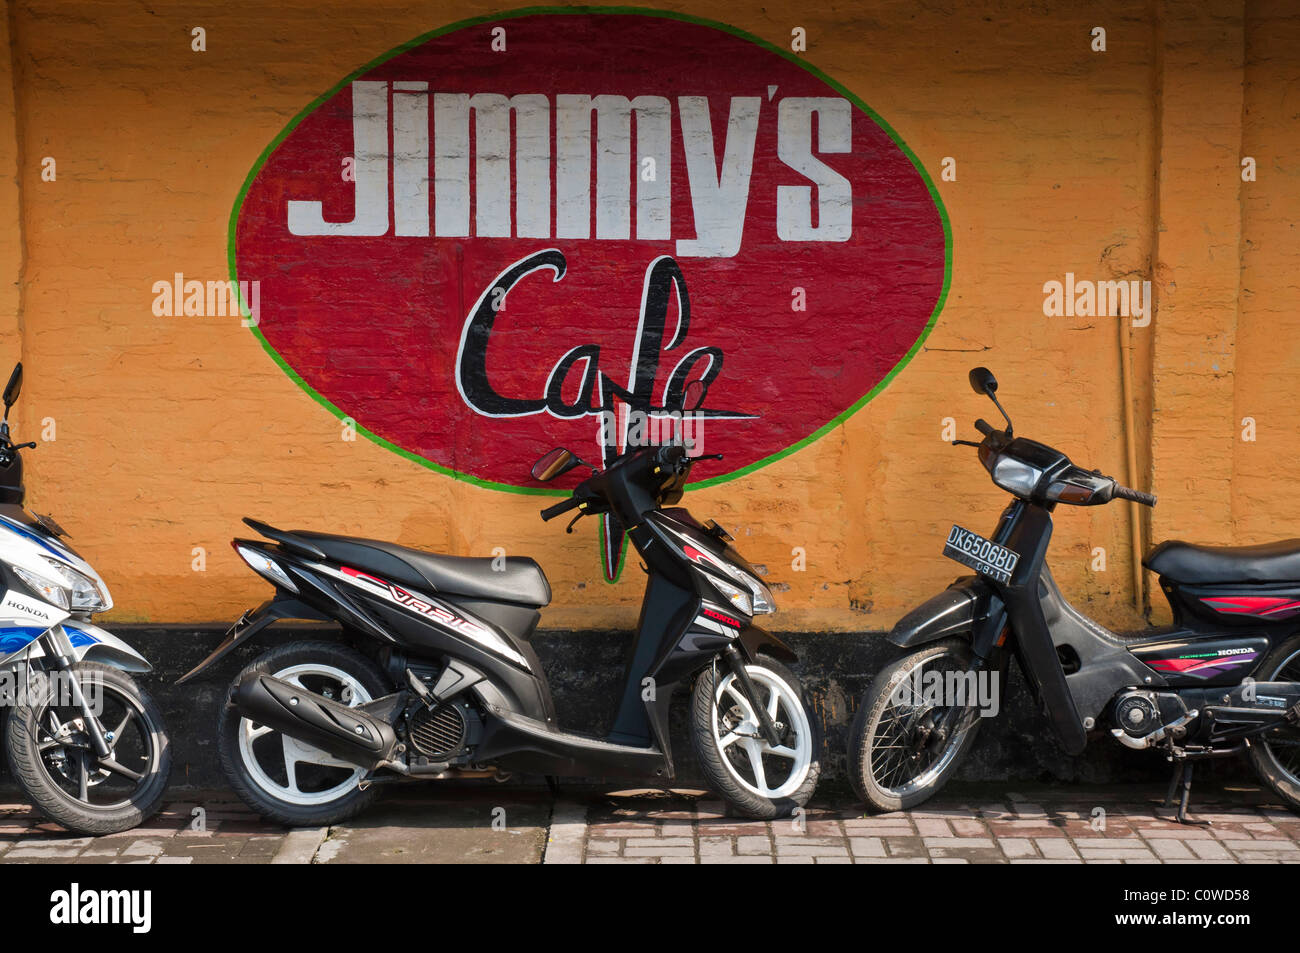 Scooters parcheggiato outiside ben noto bar Jimmy's Cafe in Sanur Bali Indonesia Foto Stock